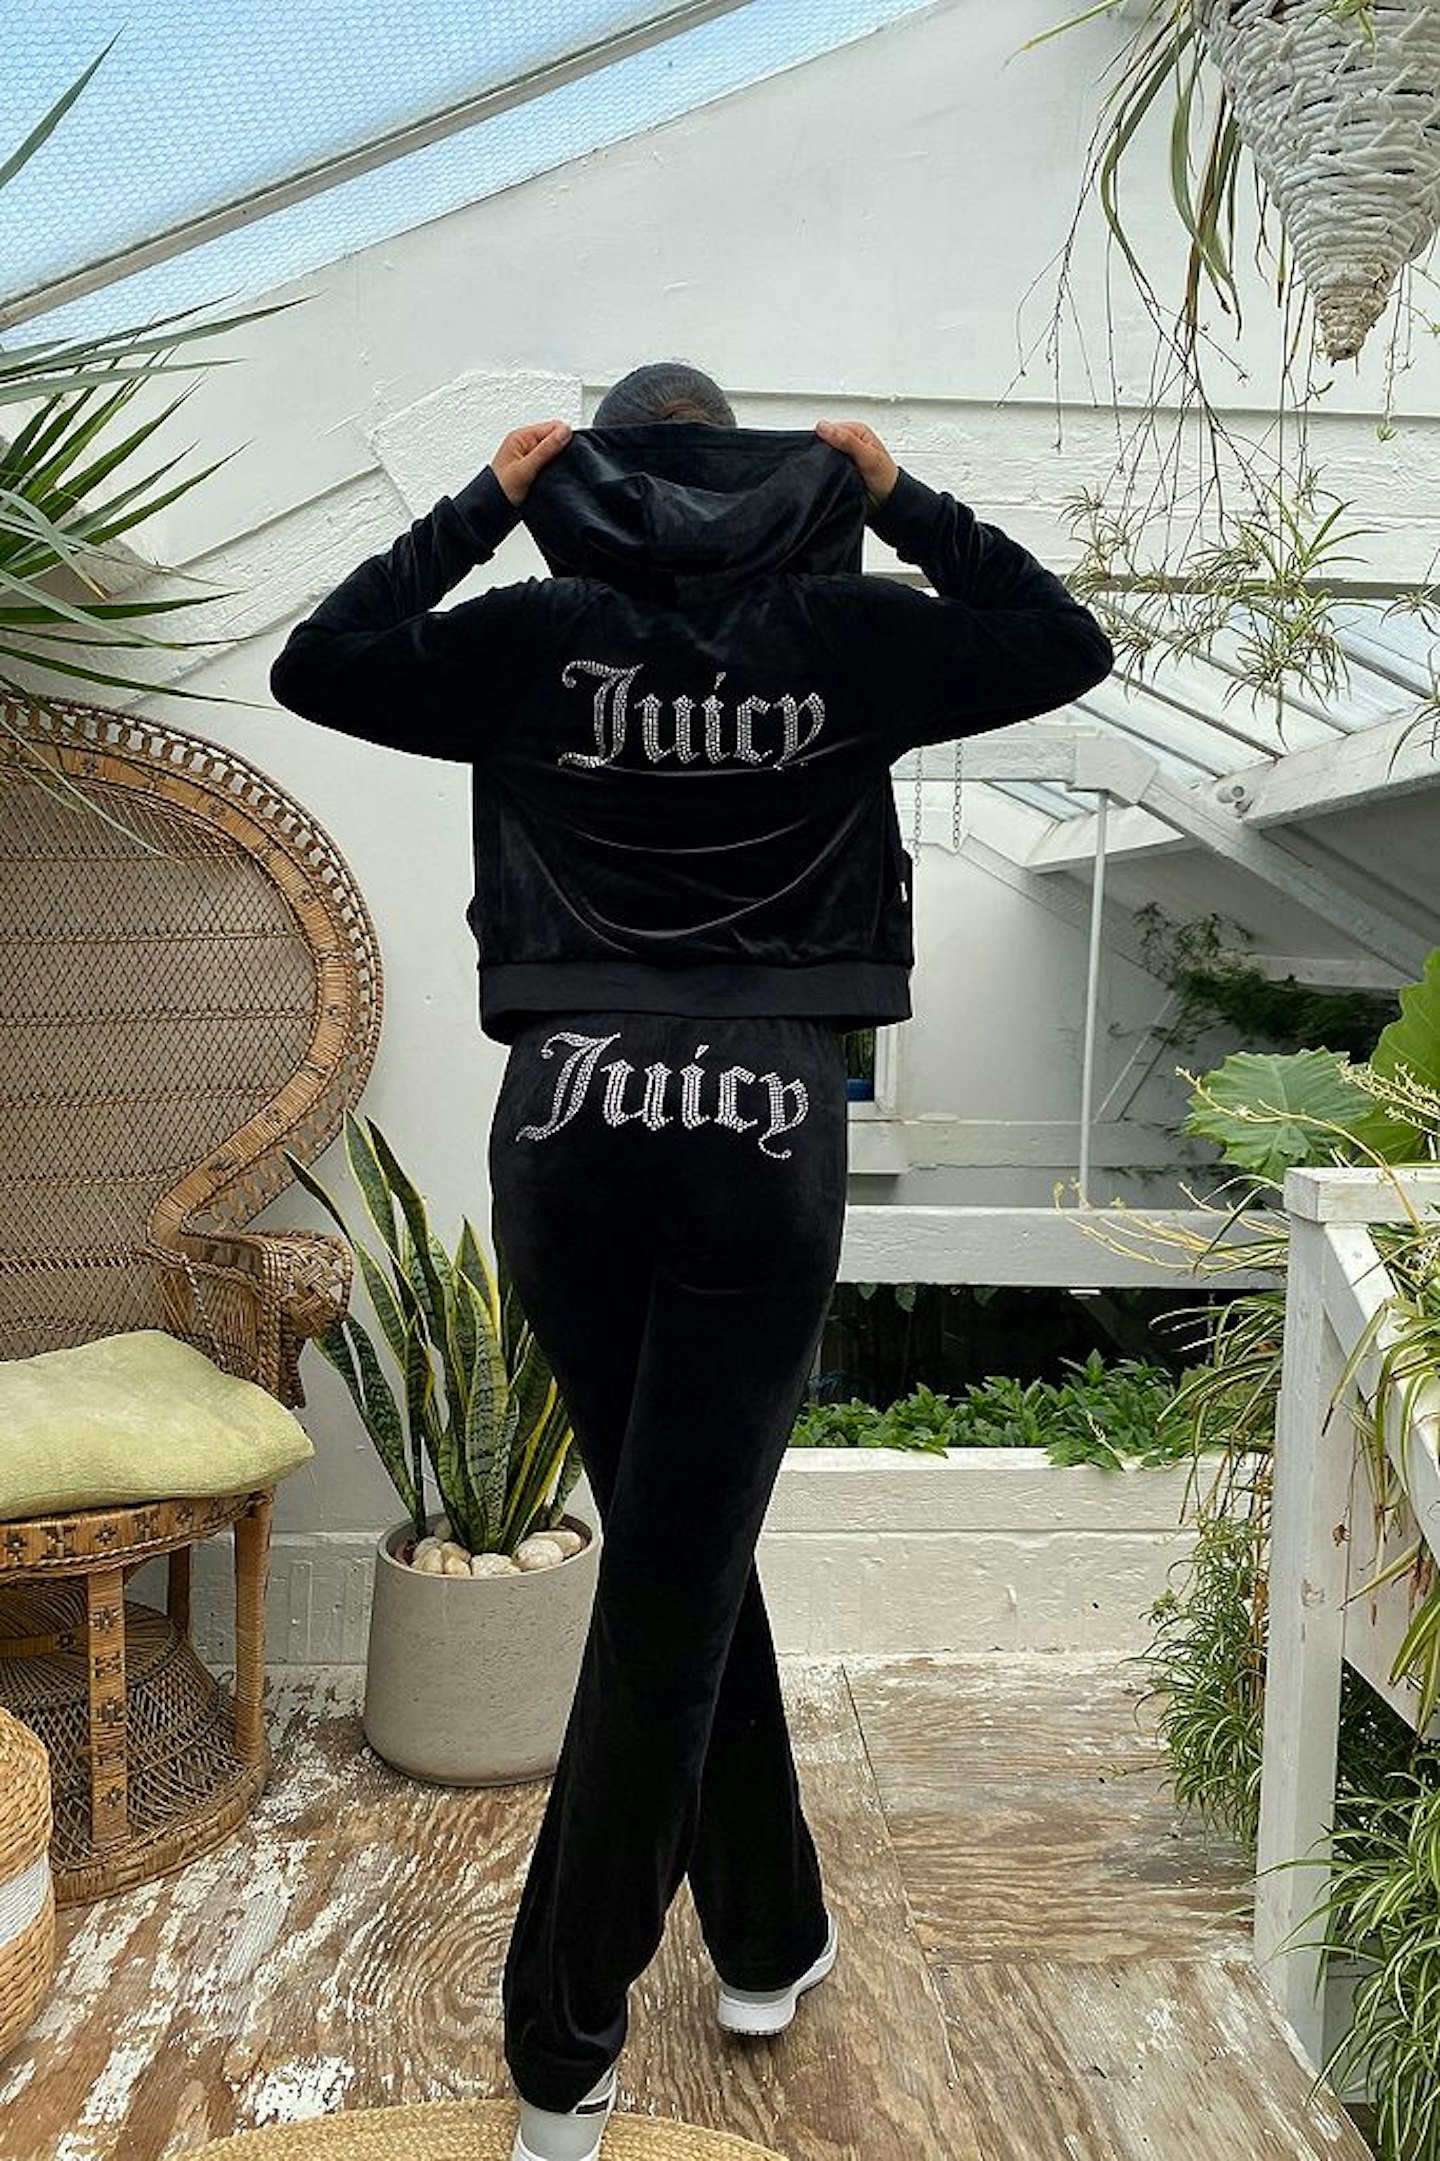 6 Women Wore Juicy Couture Tracksuits to Work and Everything Got